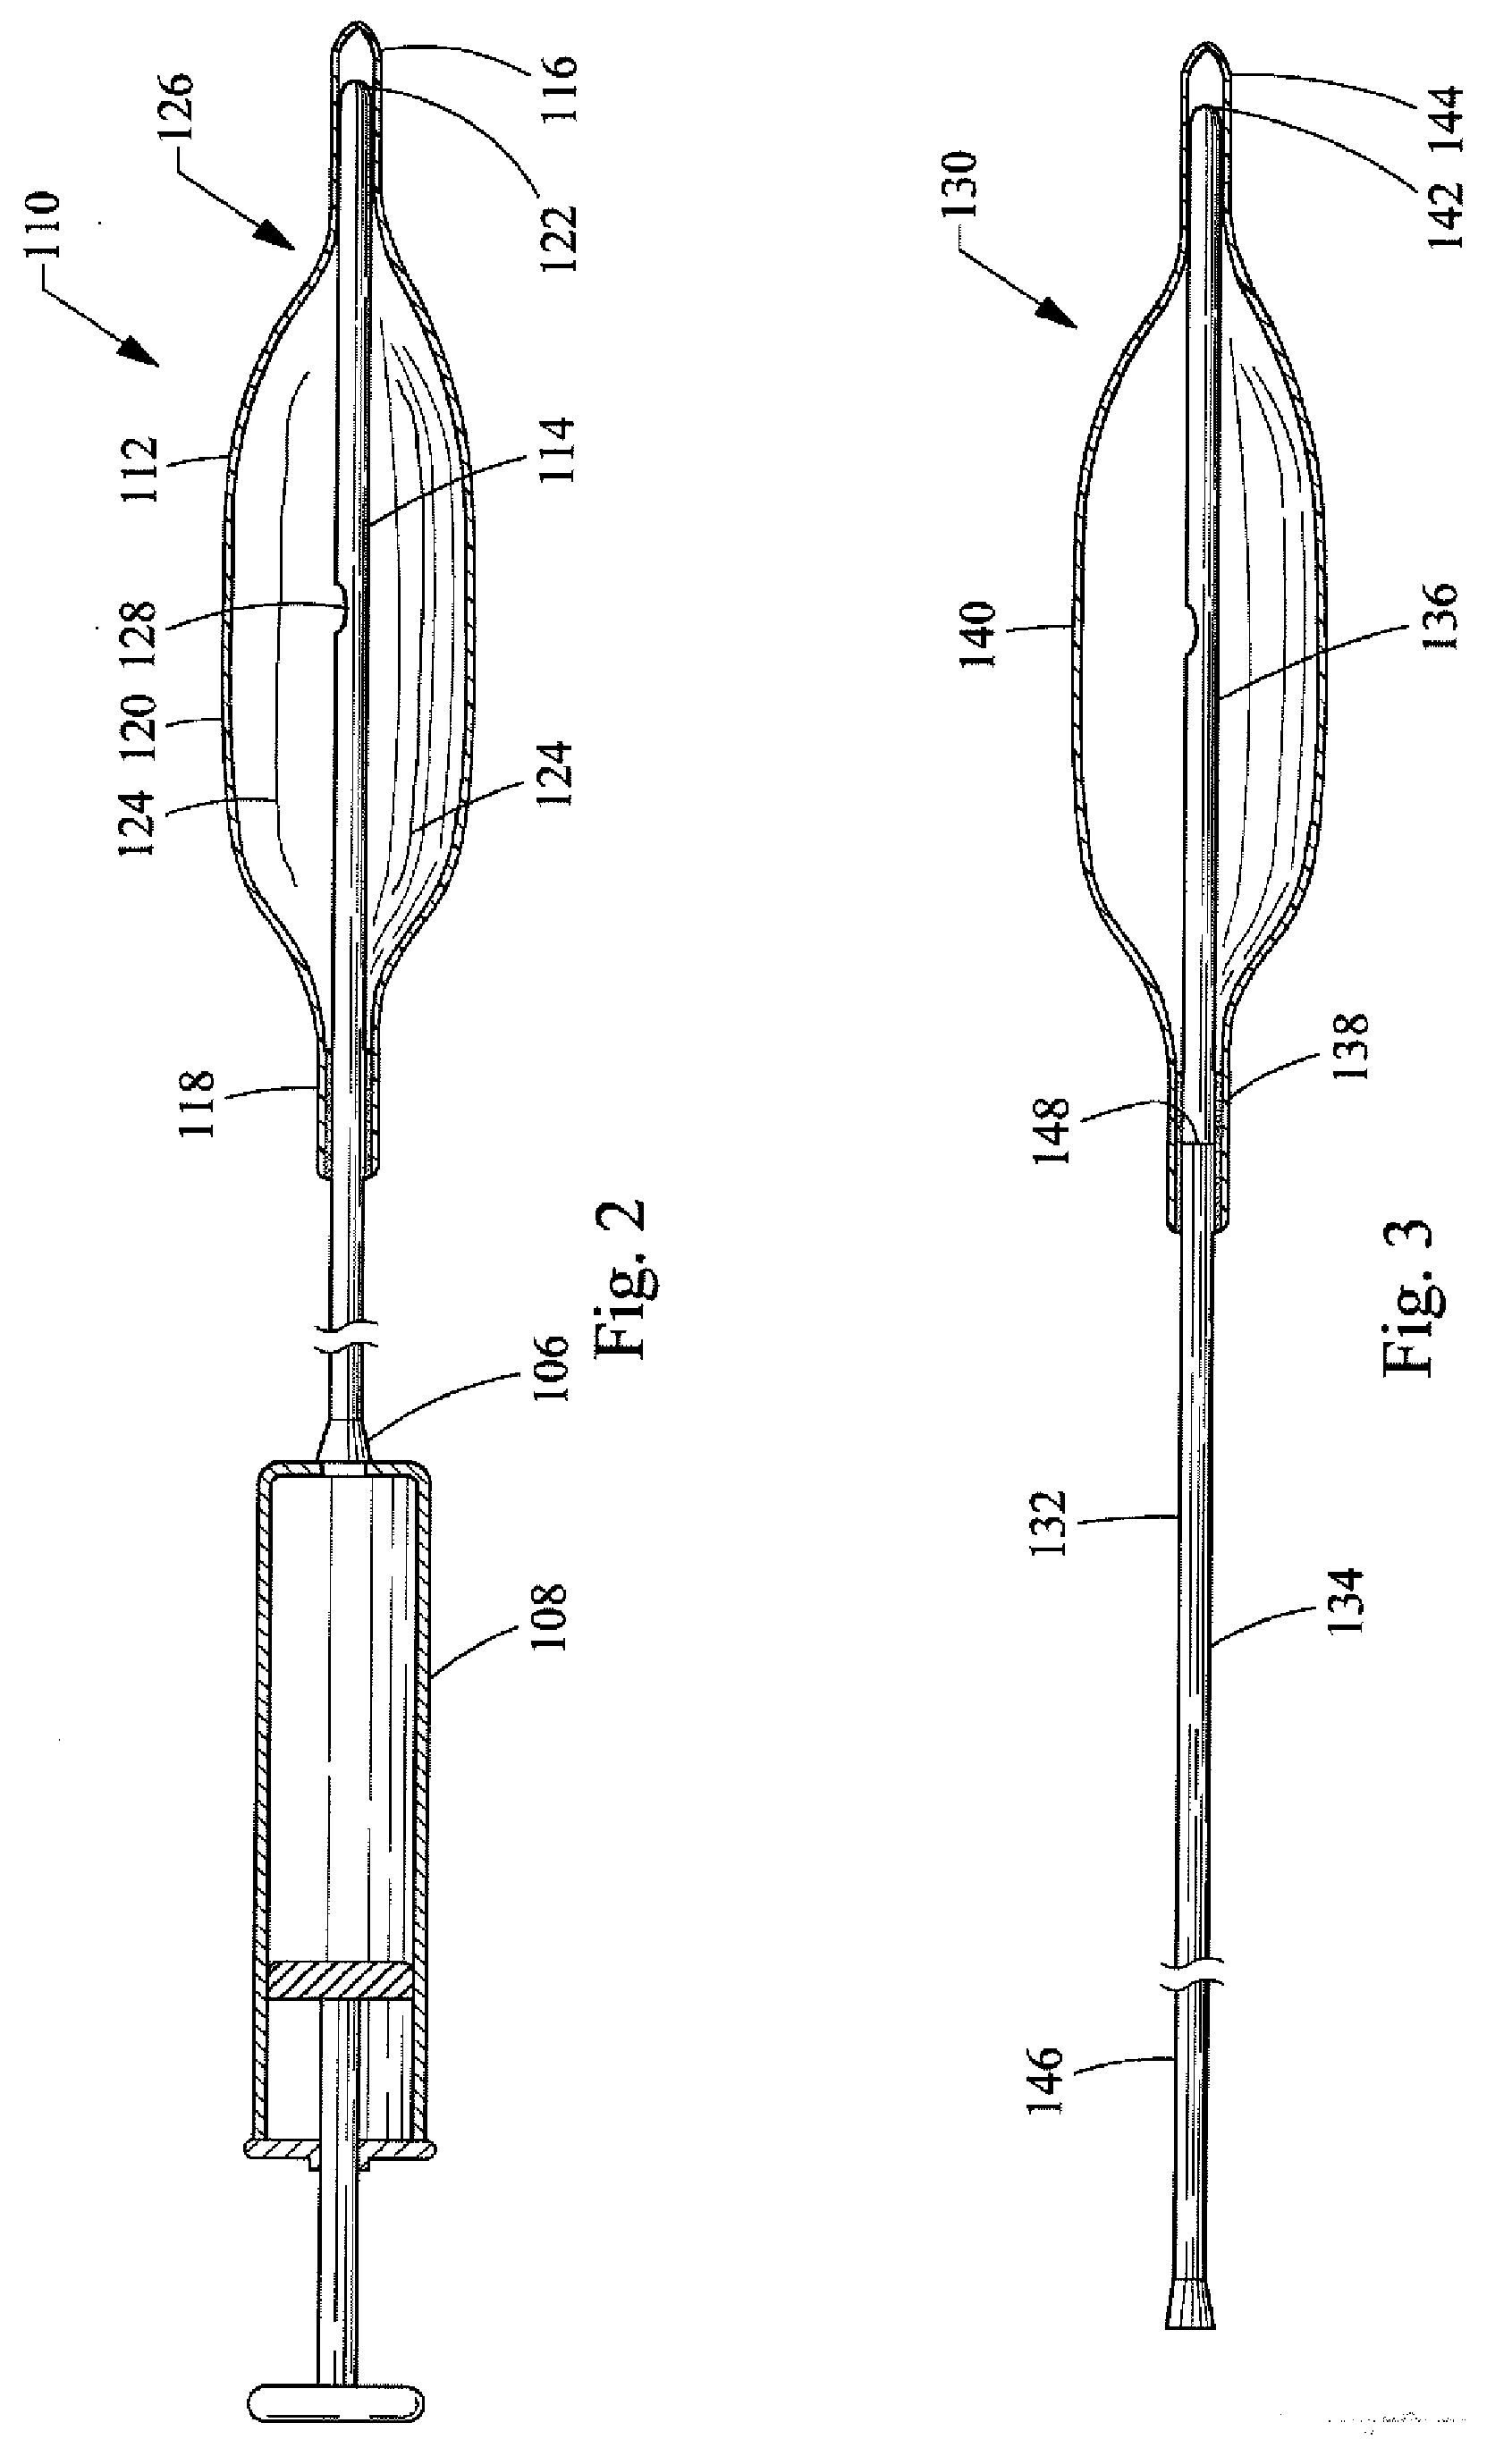 Non-buckling balloon catheter with spring loaded floating flexible tip